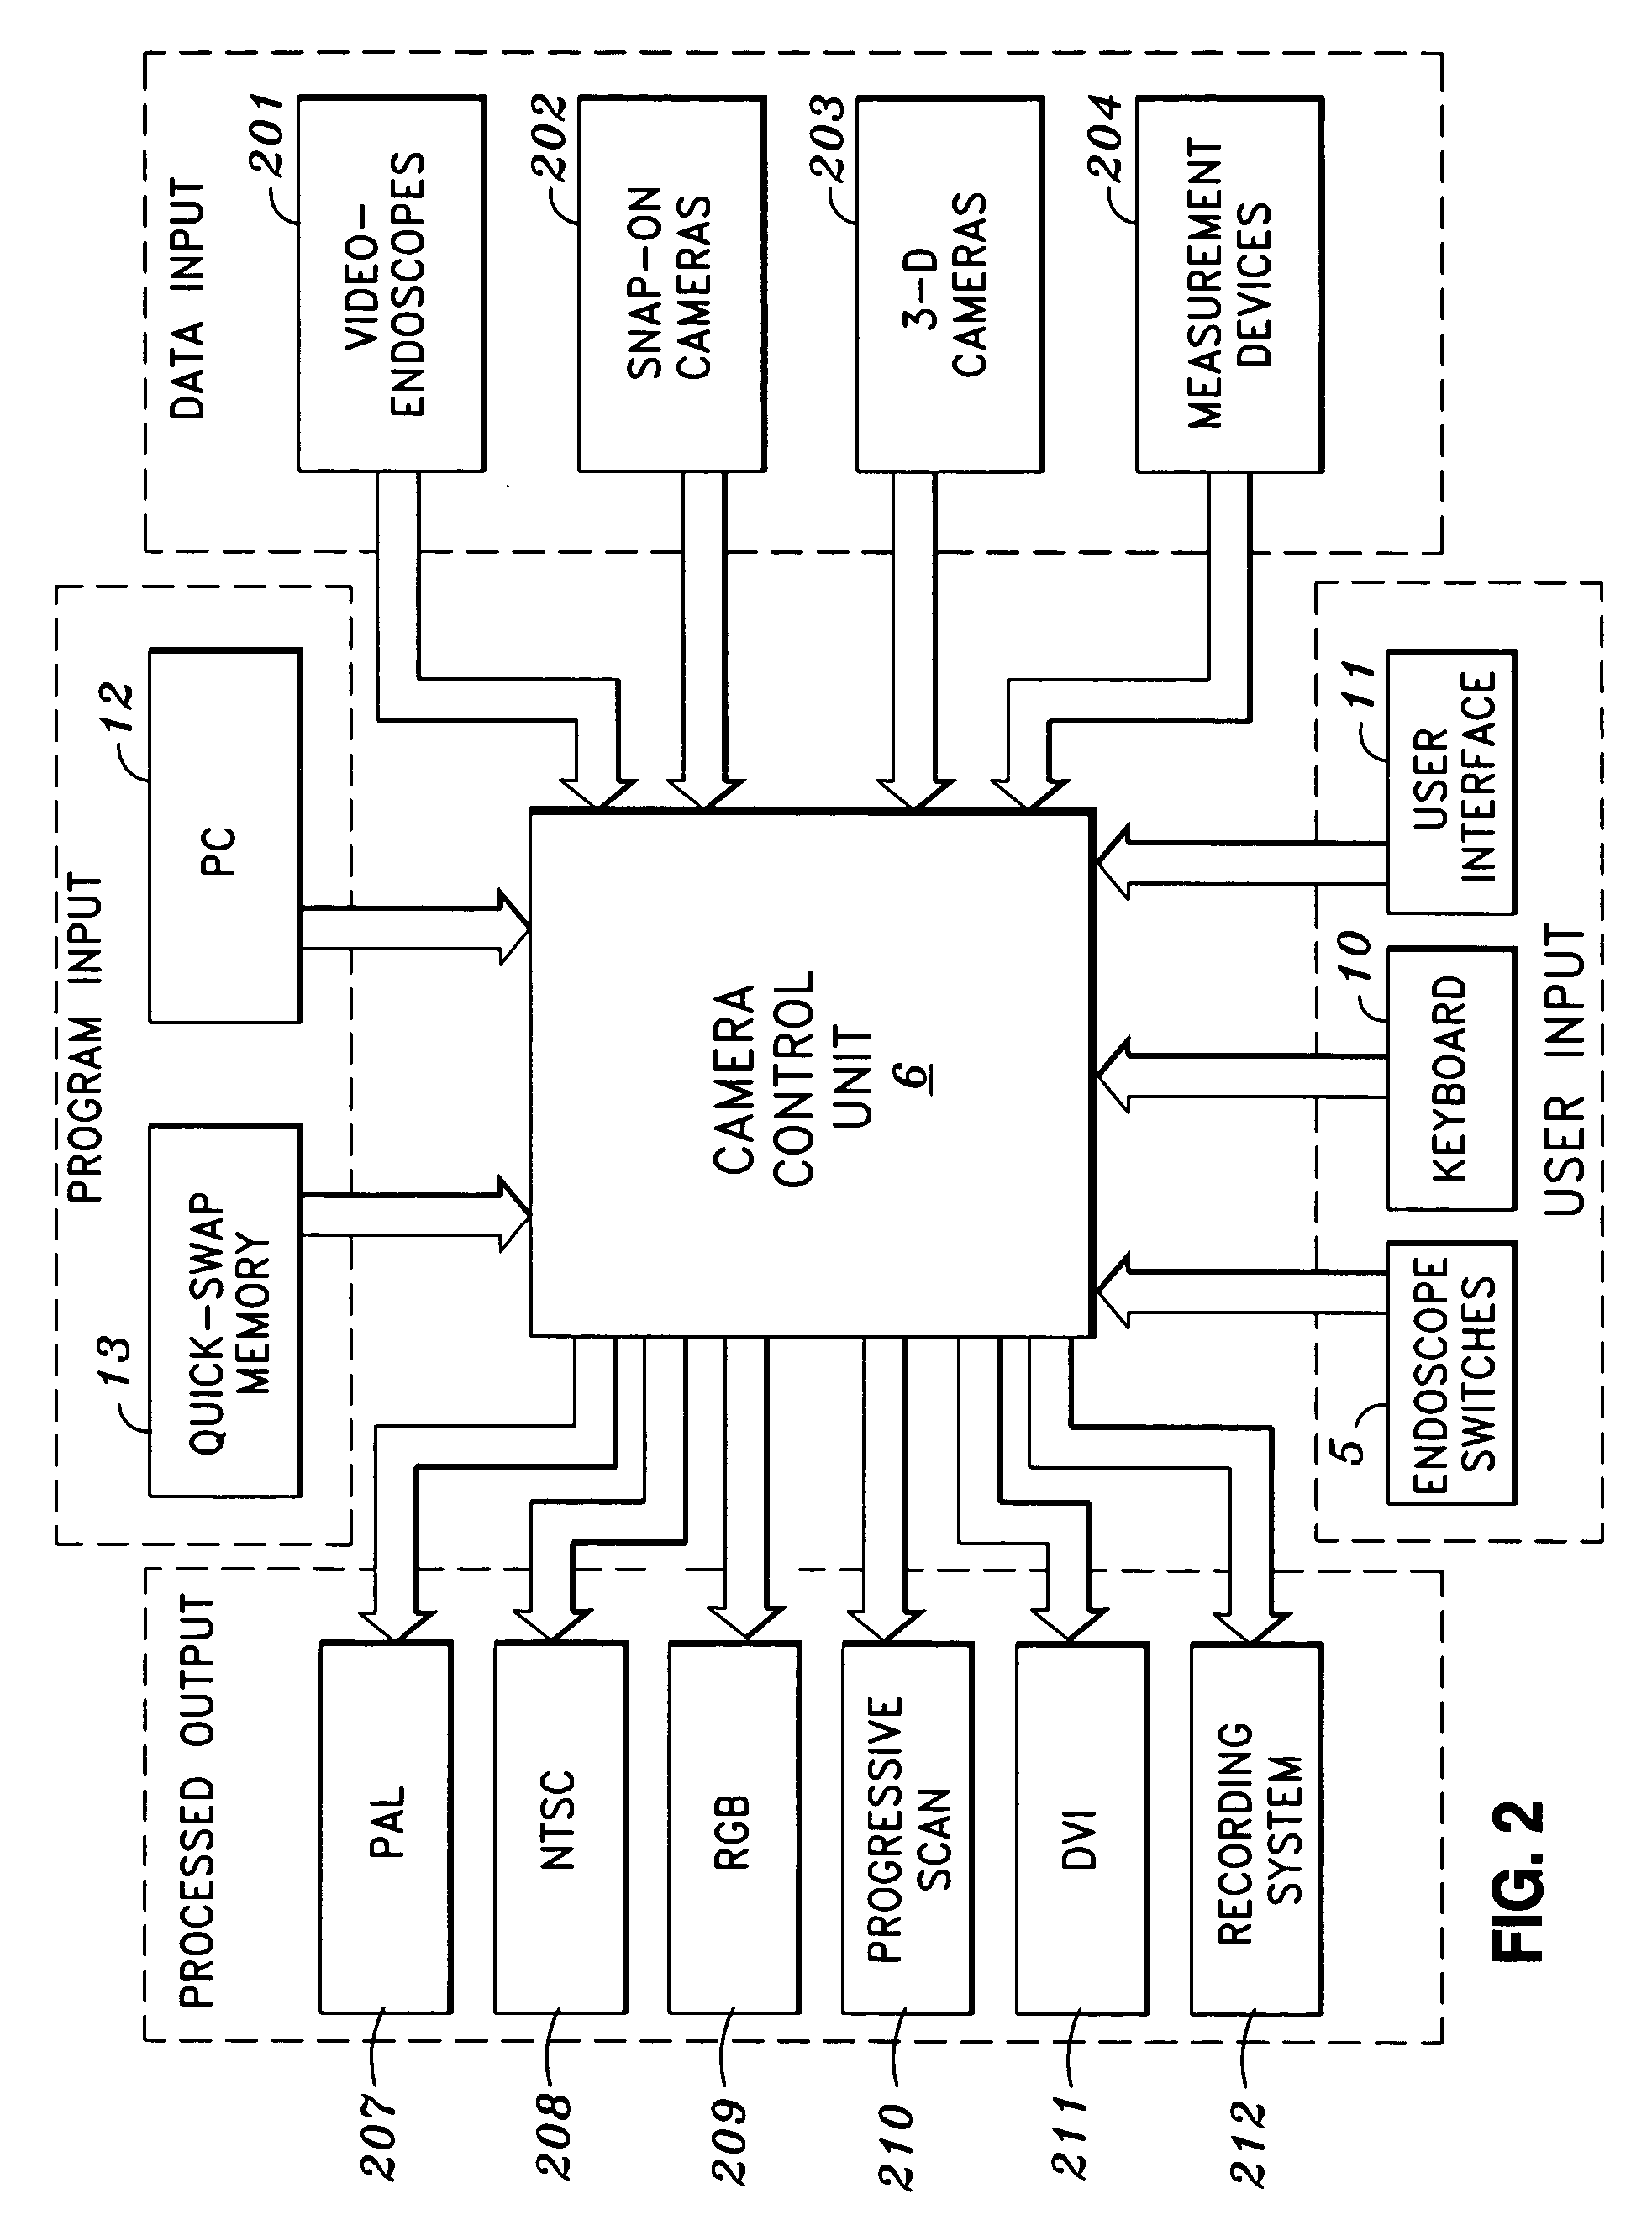 Endoscopy device supporting multiple input devices